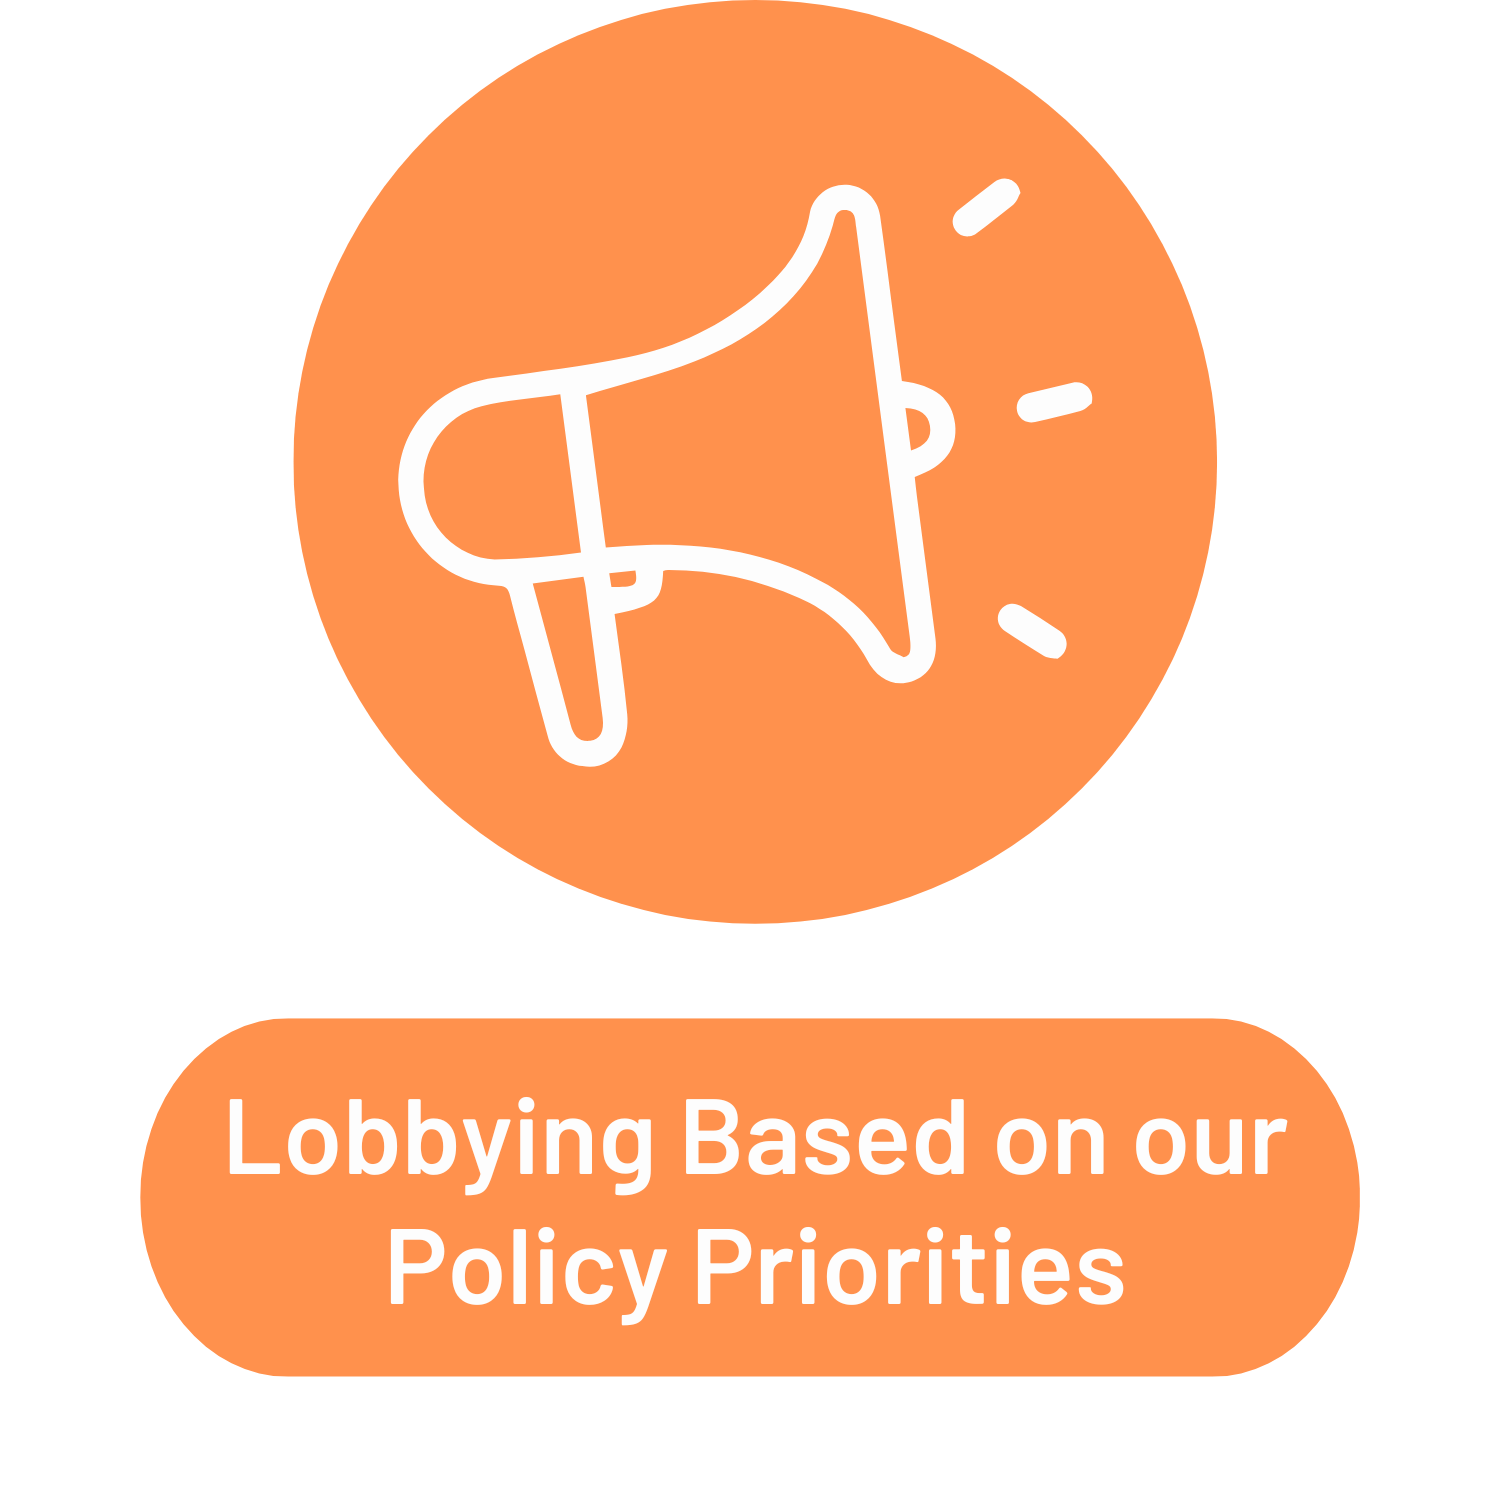 Lobbying Based on our Policy Priorities